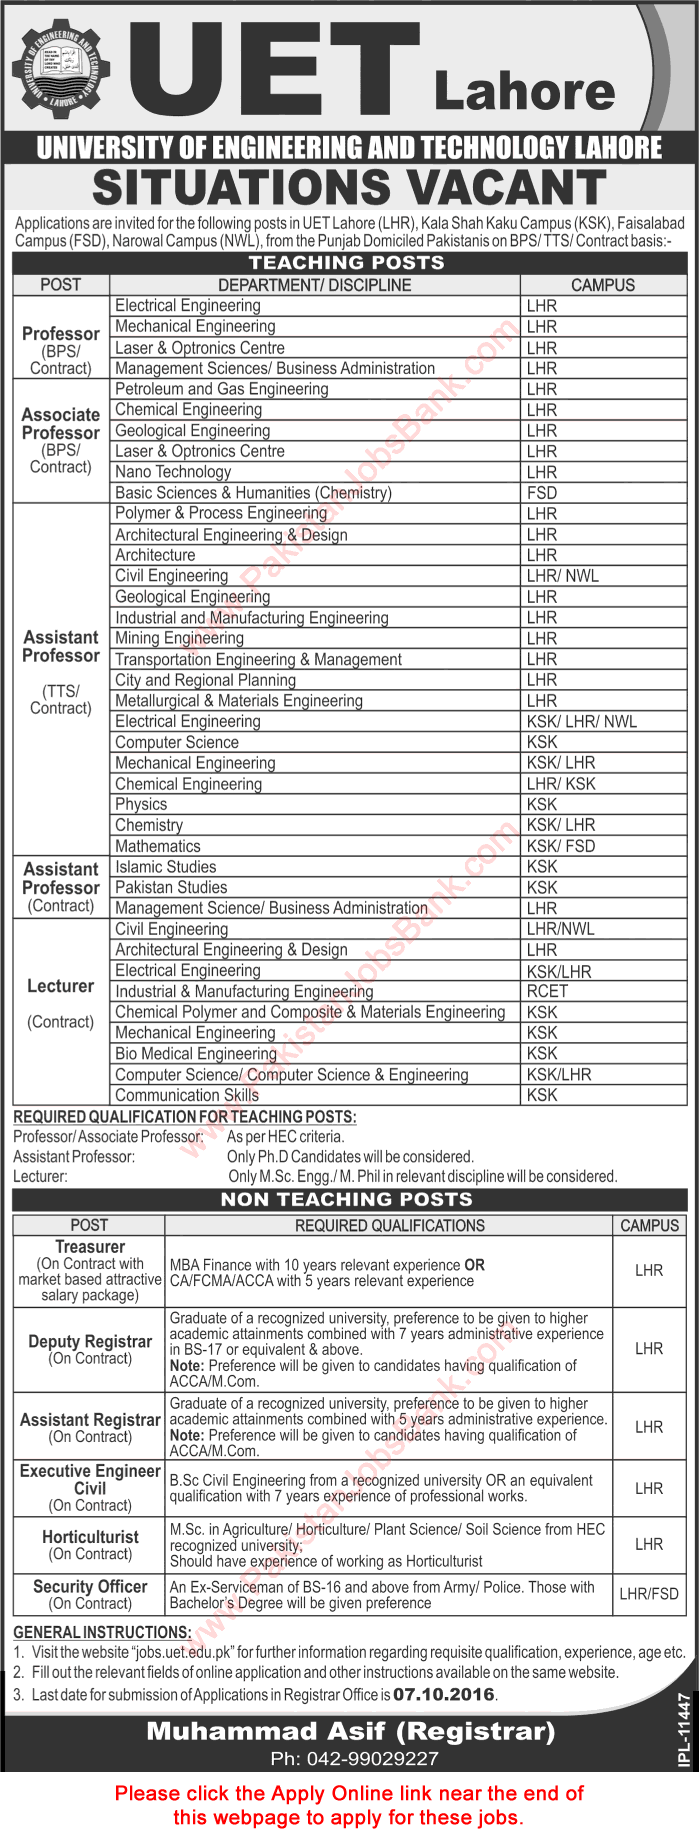 UET Lahore Jobs September 2016 Apply Online Teaching Faculty, Admin & Support Staff Latest